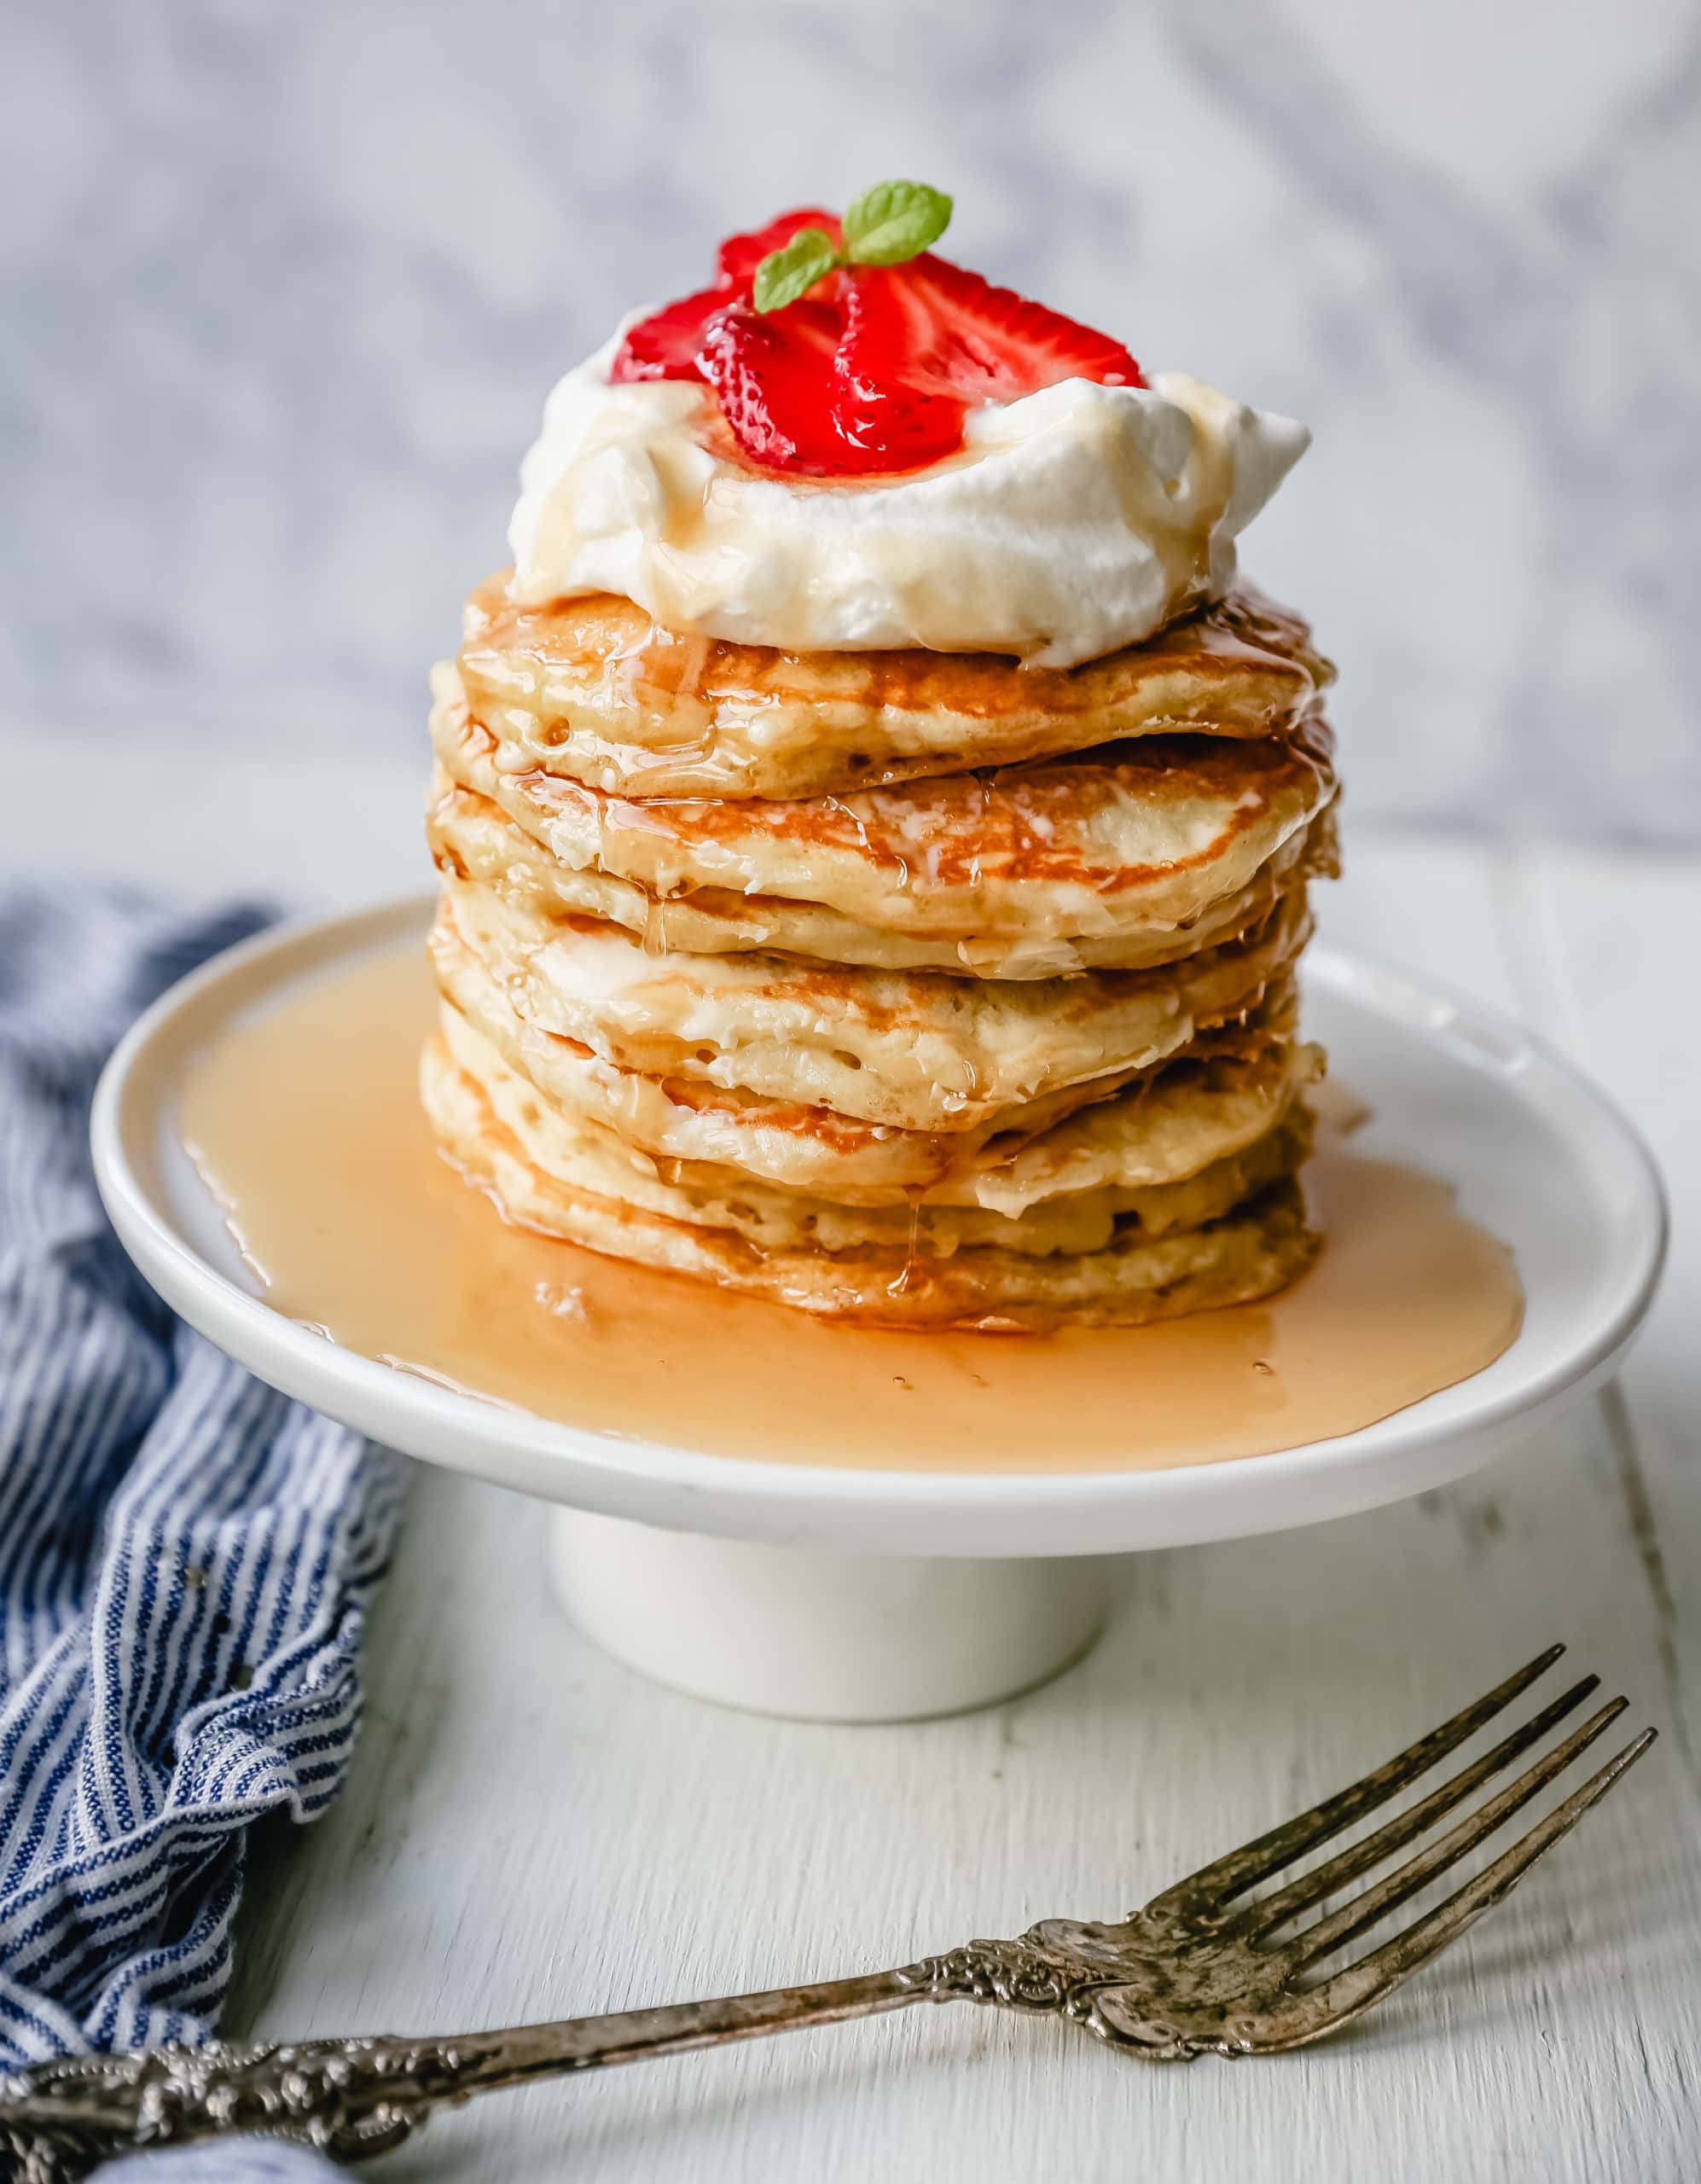 BEST BUTTERMILK PANCAKES. The best homemade buttermilk pancake recipe! This is the only pancake recipe you will ever need. Tender texture, light and fluffy, and these pancakes will melt in your mouth! 